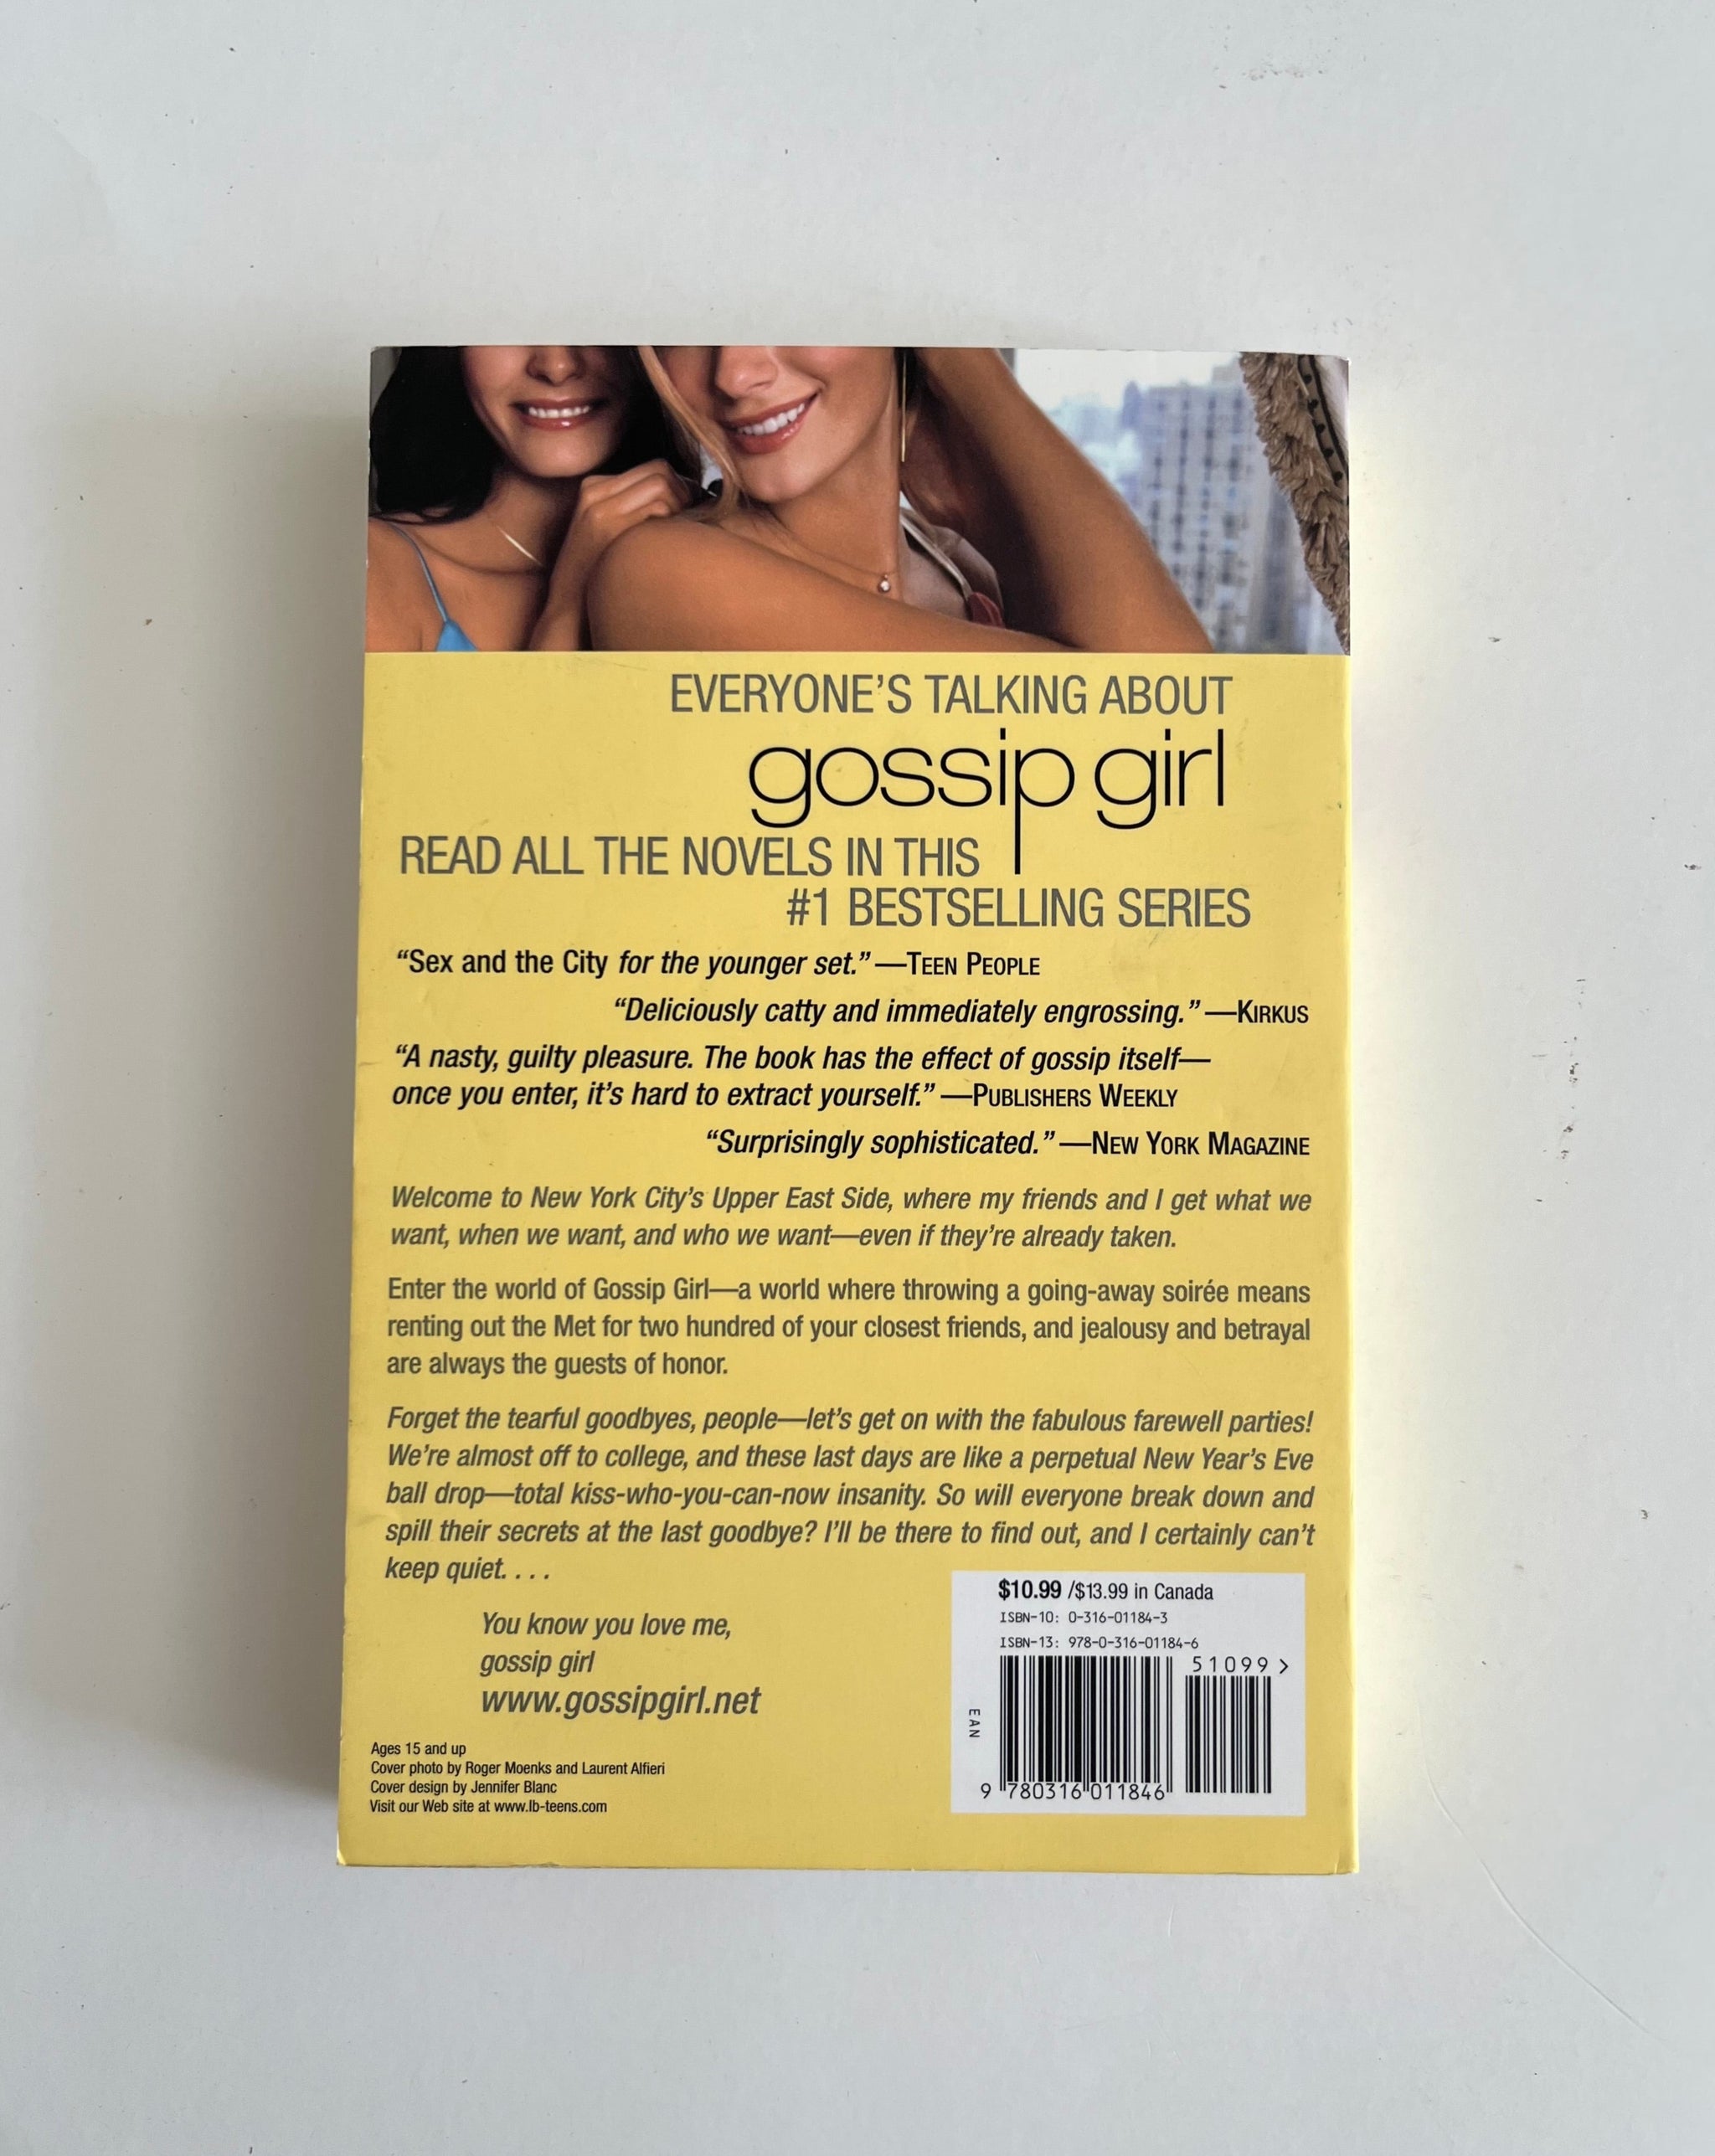 Gossip Girl: Don't You Forget About Me by Cecily von Ziegesar